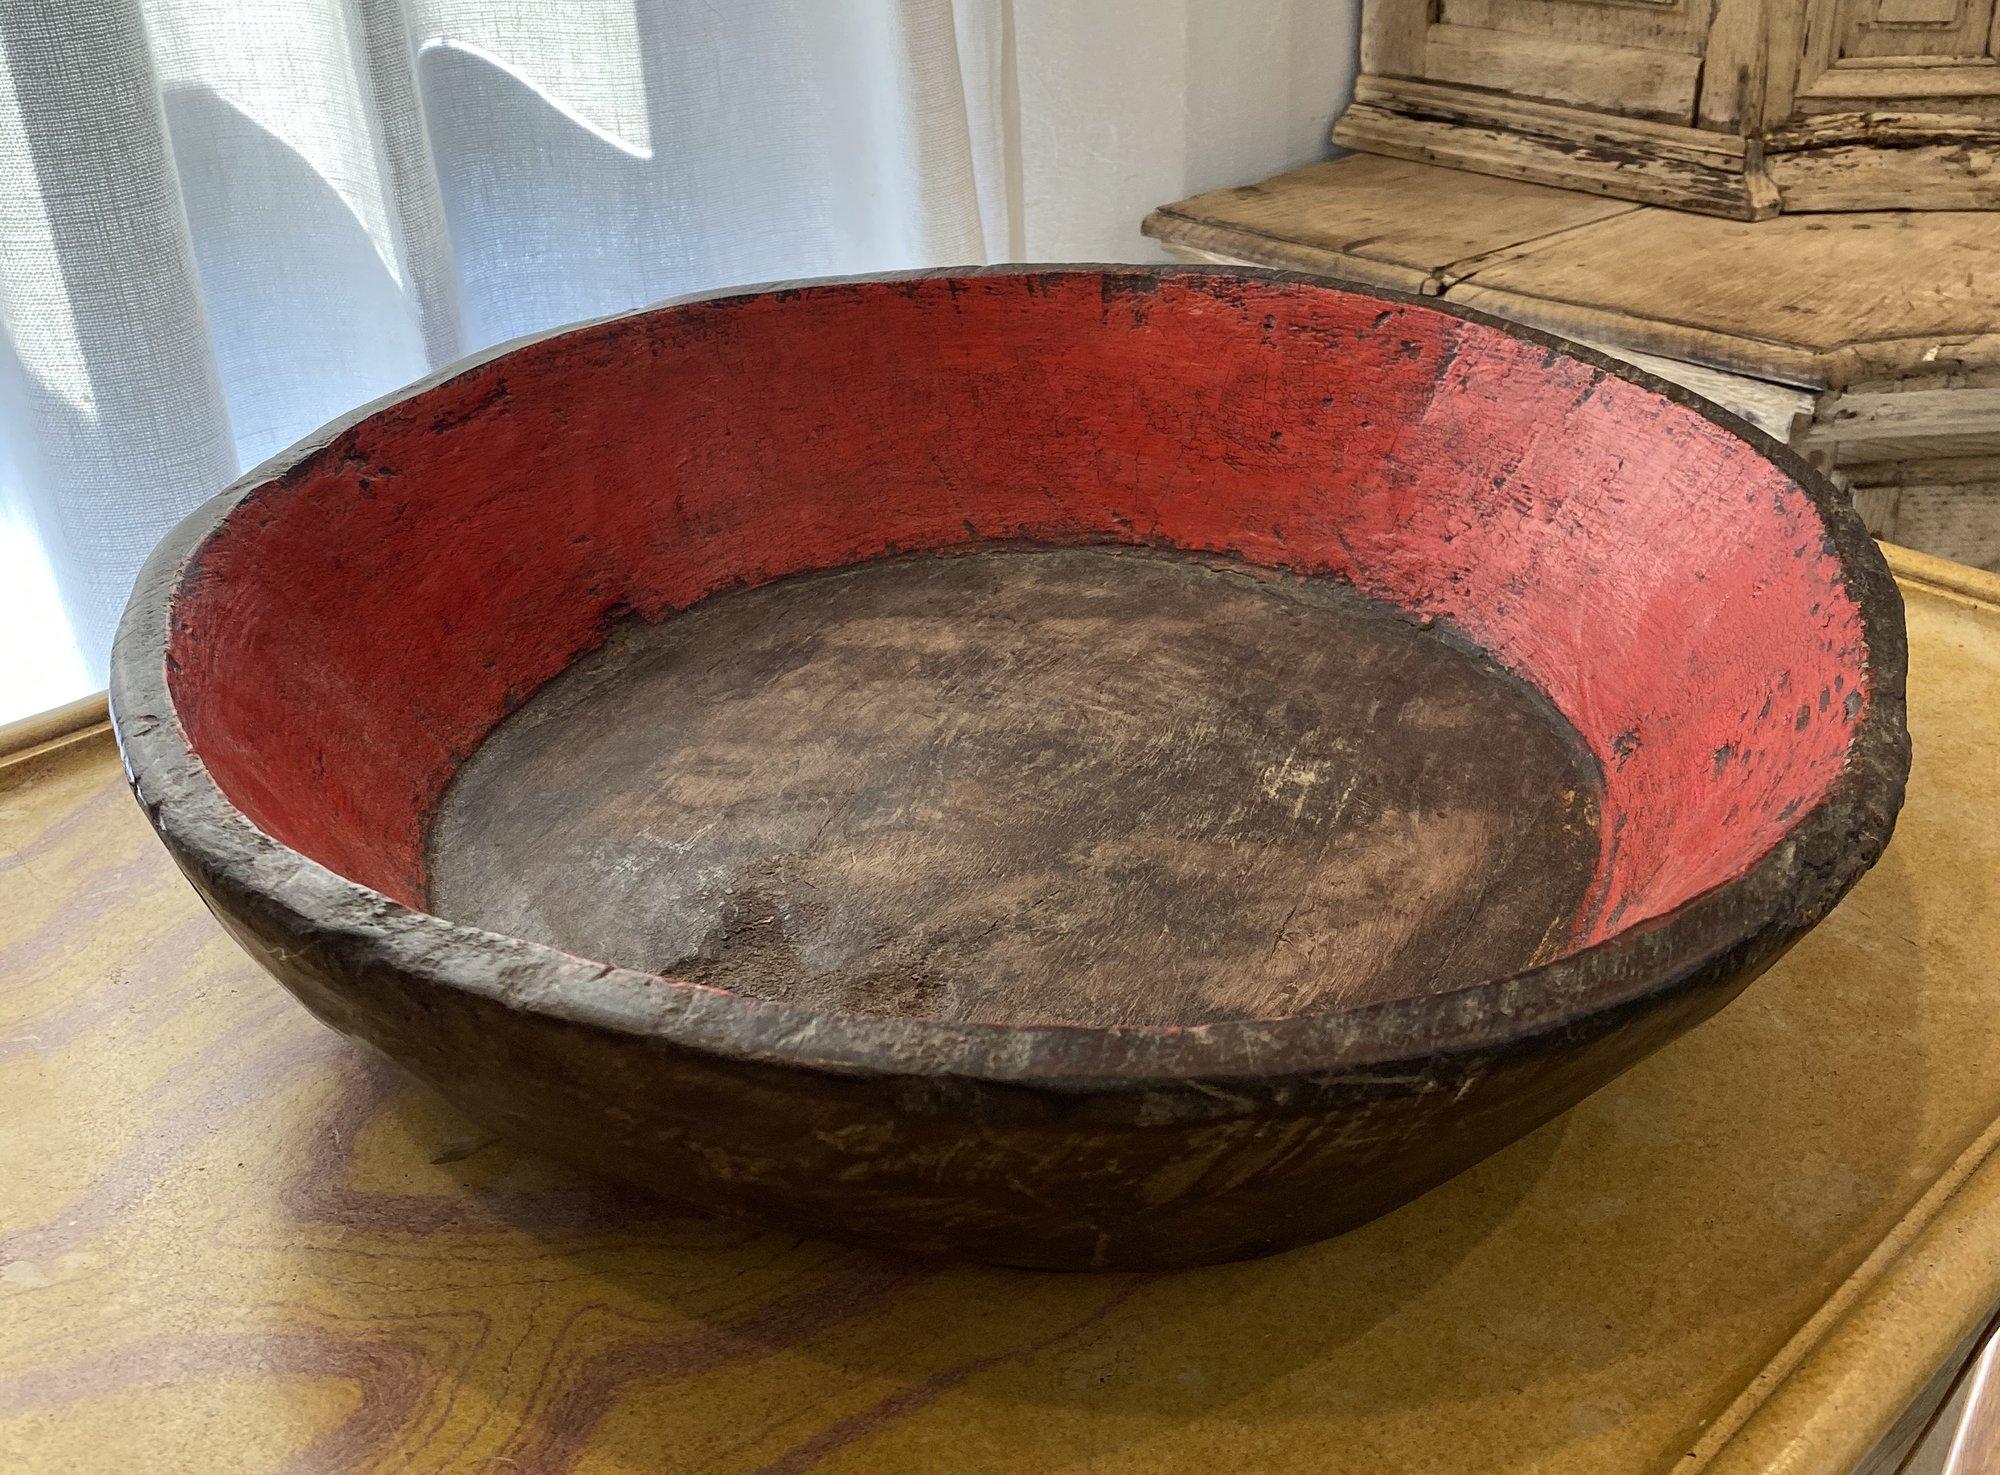 18th century or earlier Chinese wooden bowl, red interior.